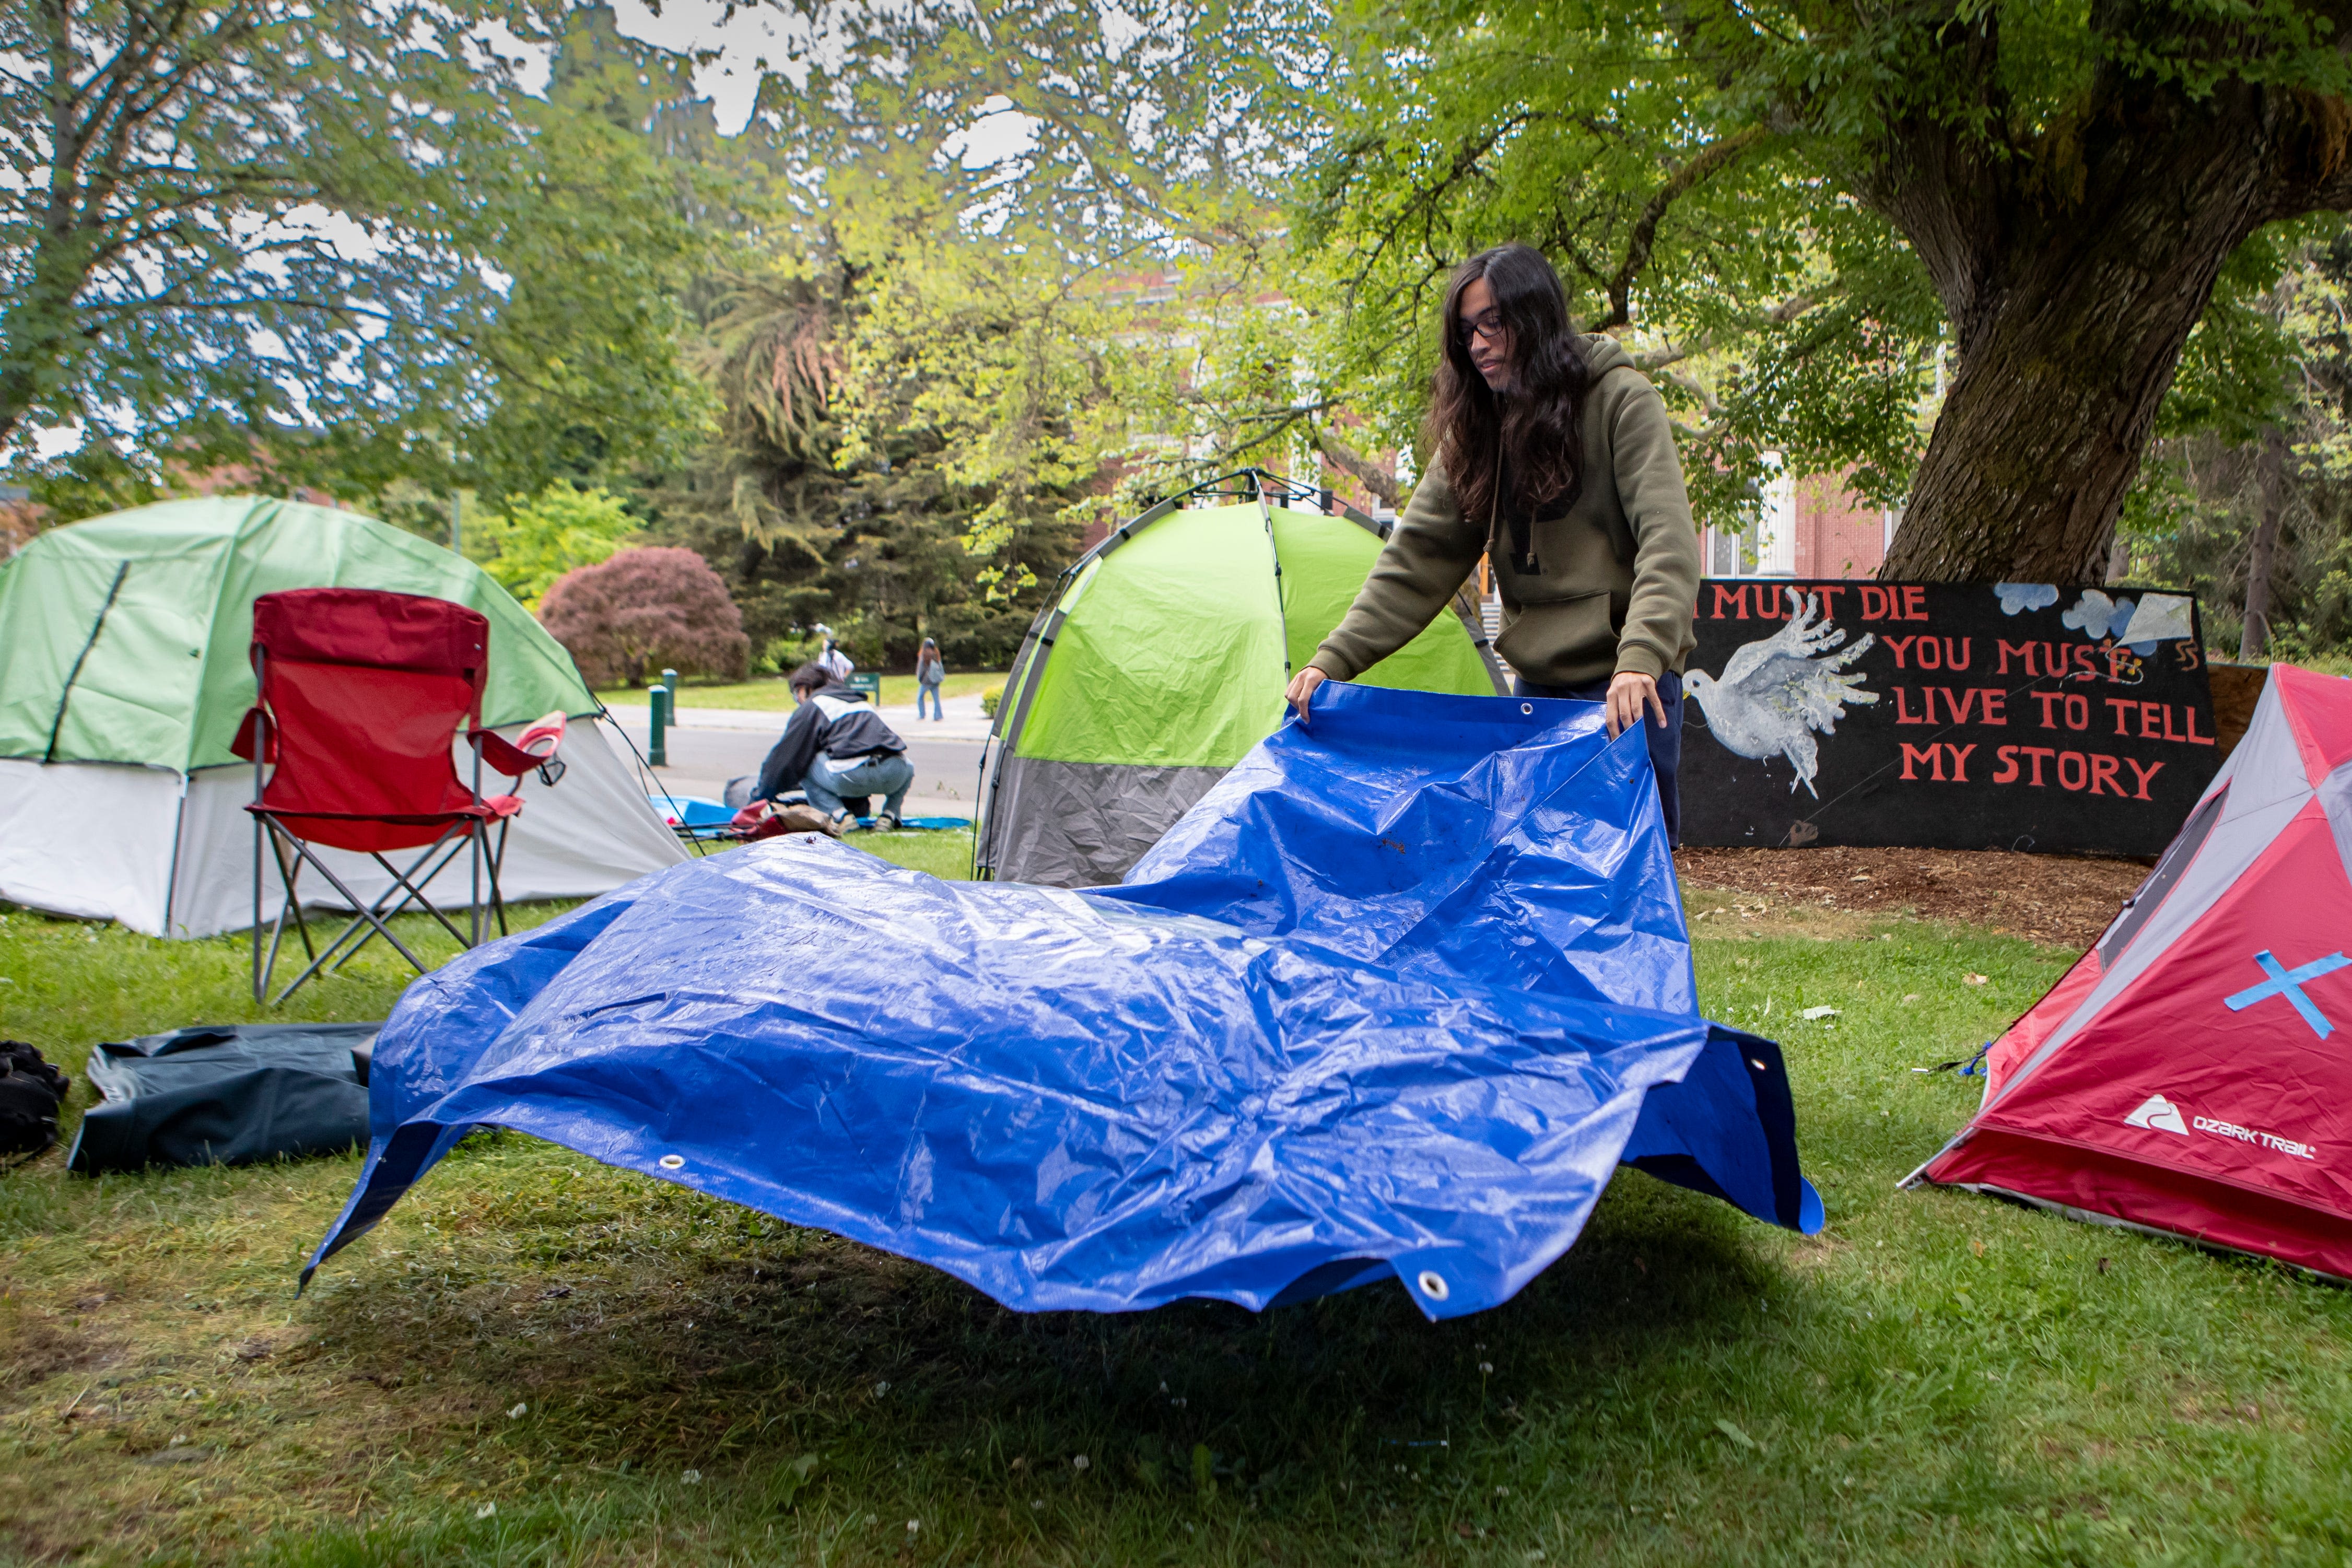 University of Oregon, pro-Palestinian protesters reach agreement, encampment comes down